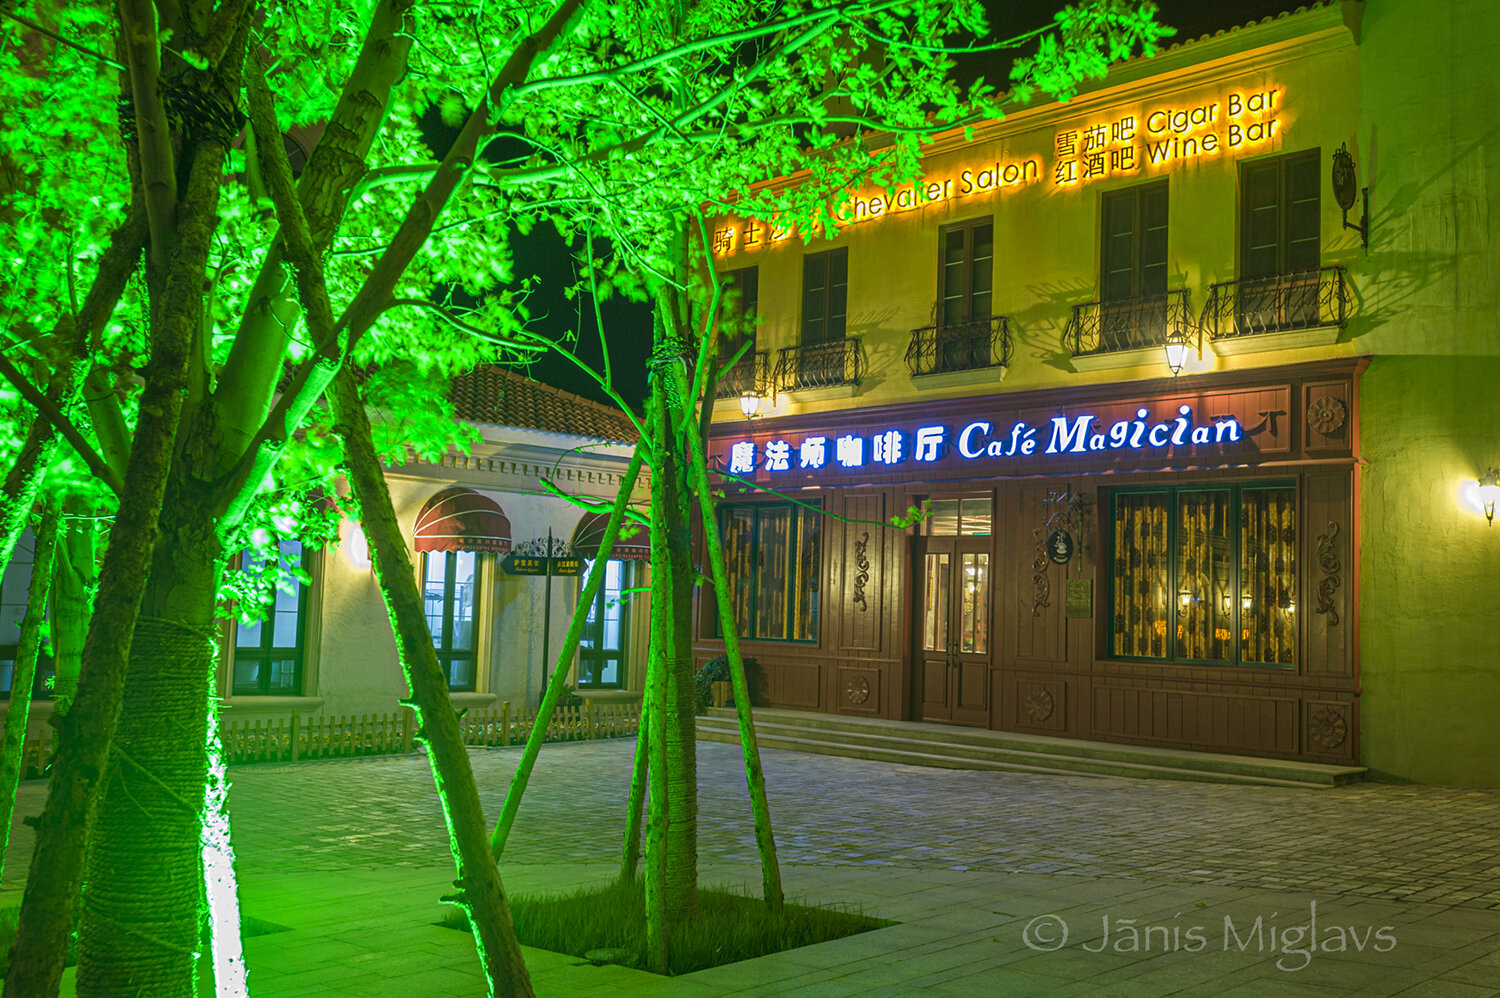 Quiet evening in the village at Chateau Changyu AFIP Global winery.